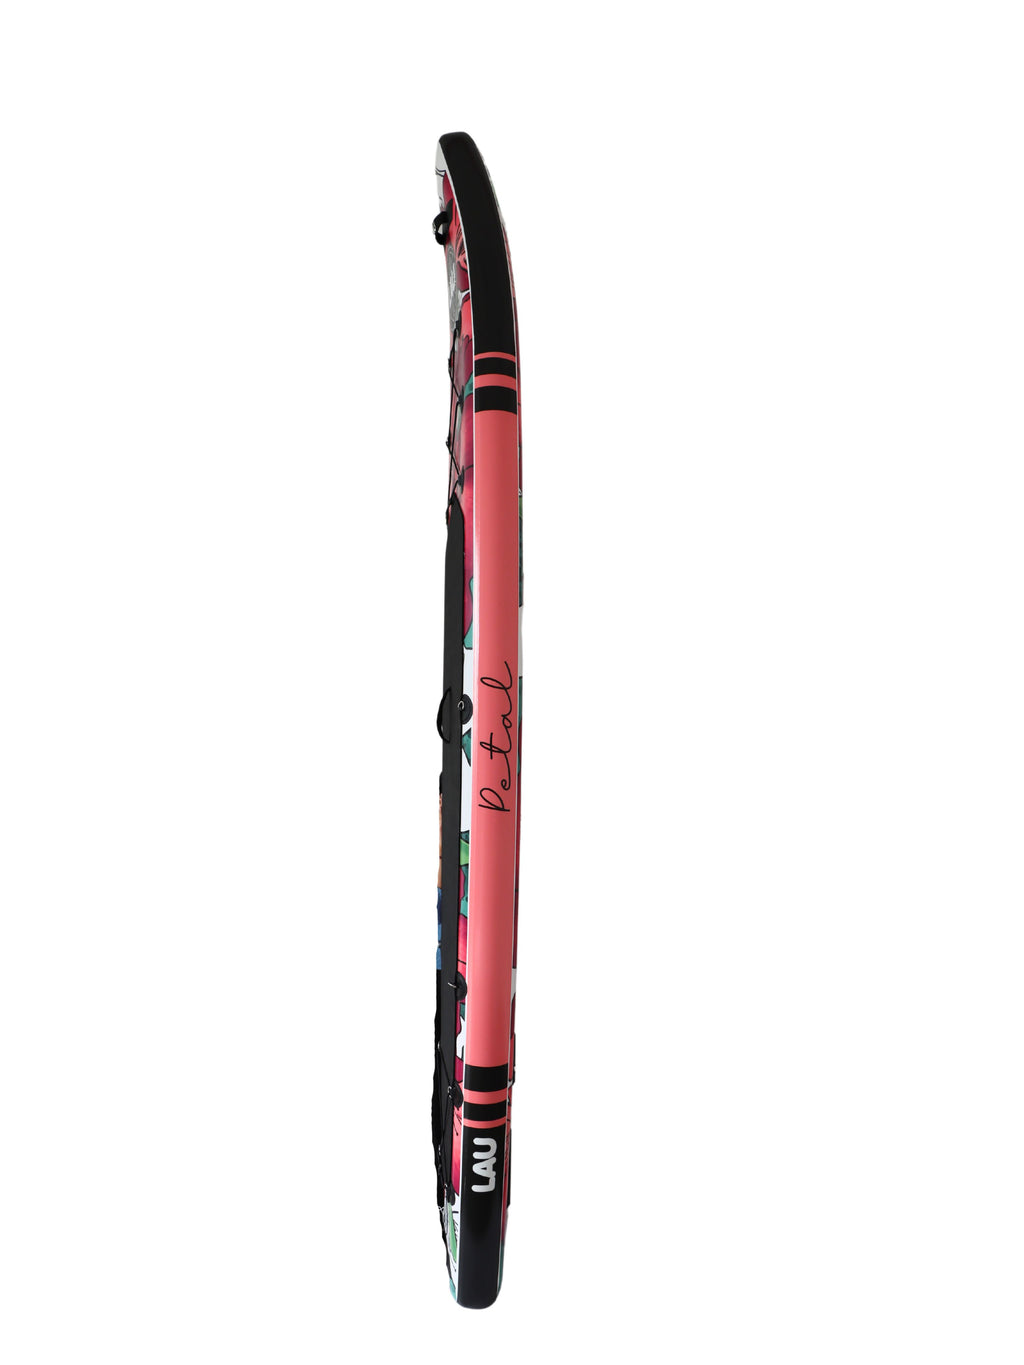 Petal-11'6 Touring- Paddle board gonflable